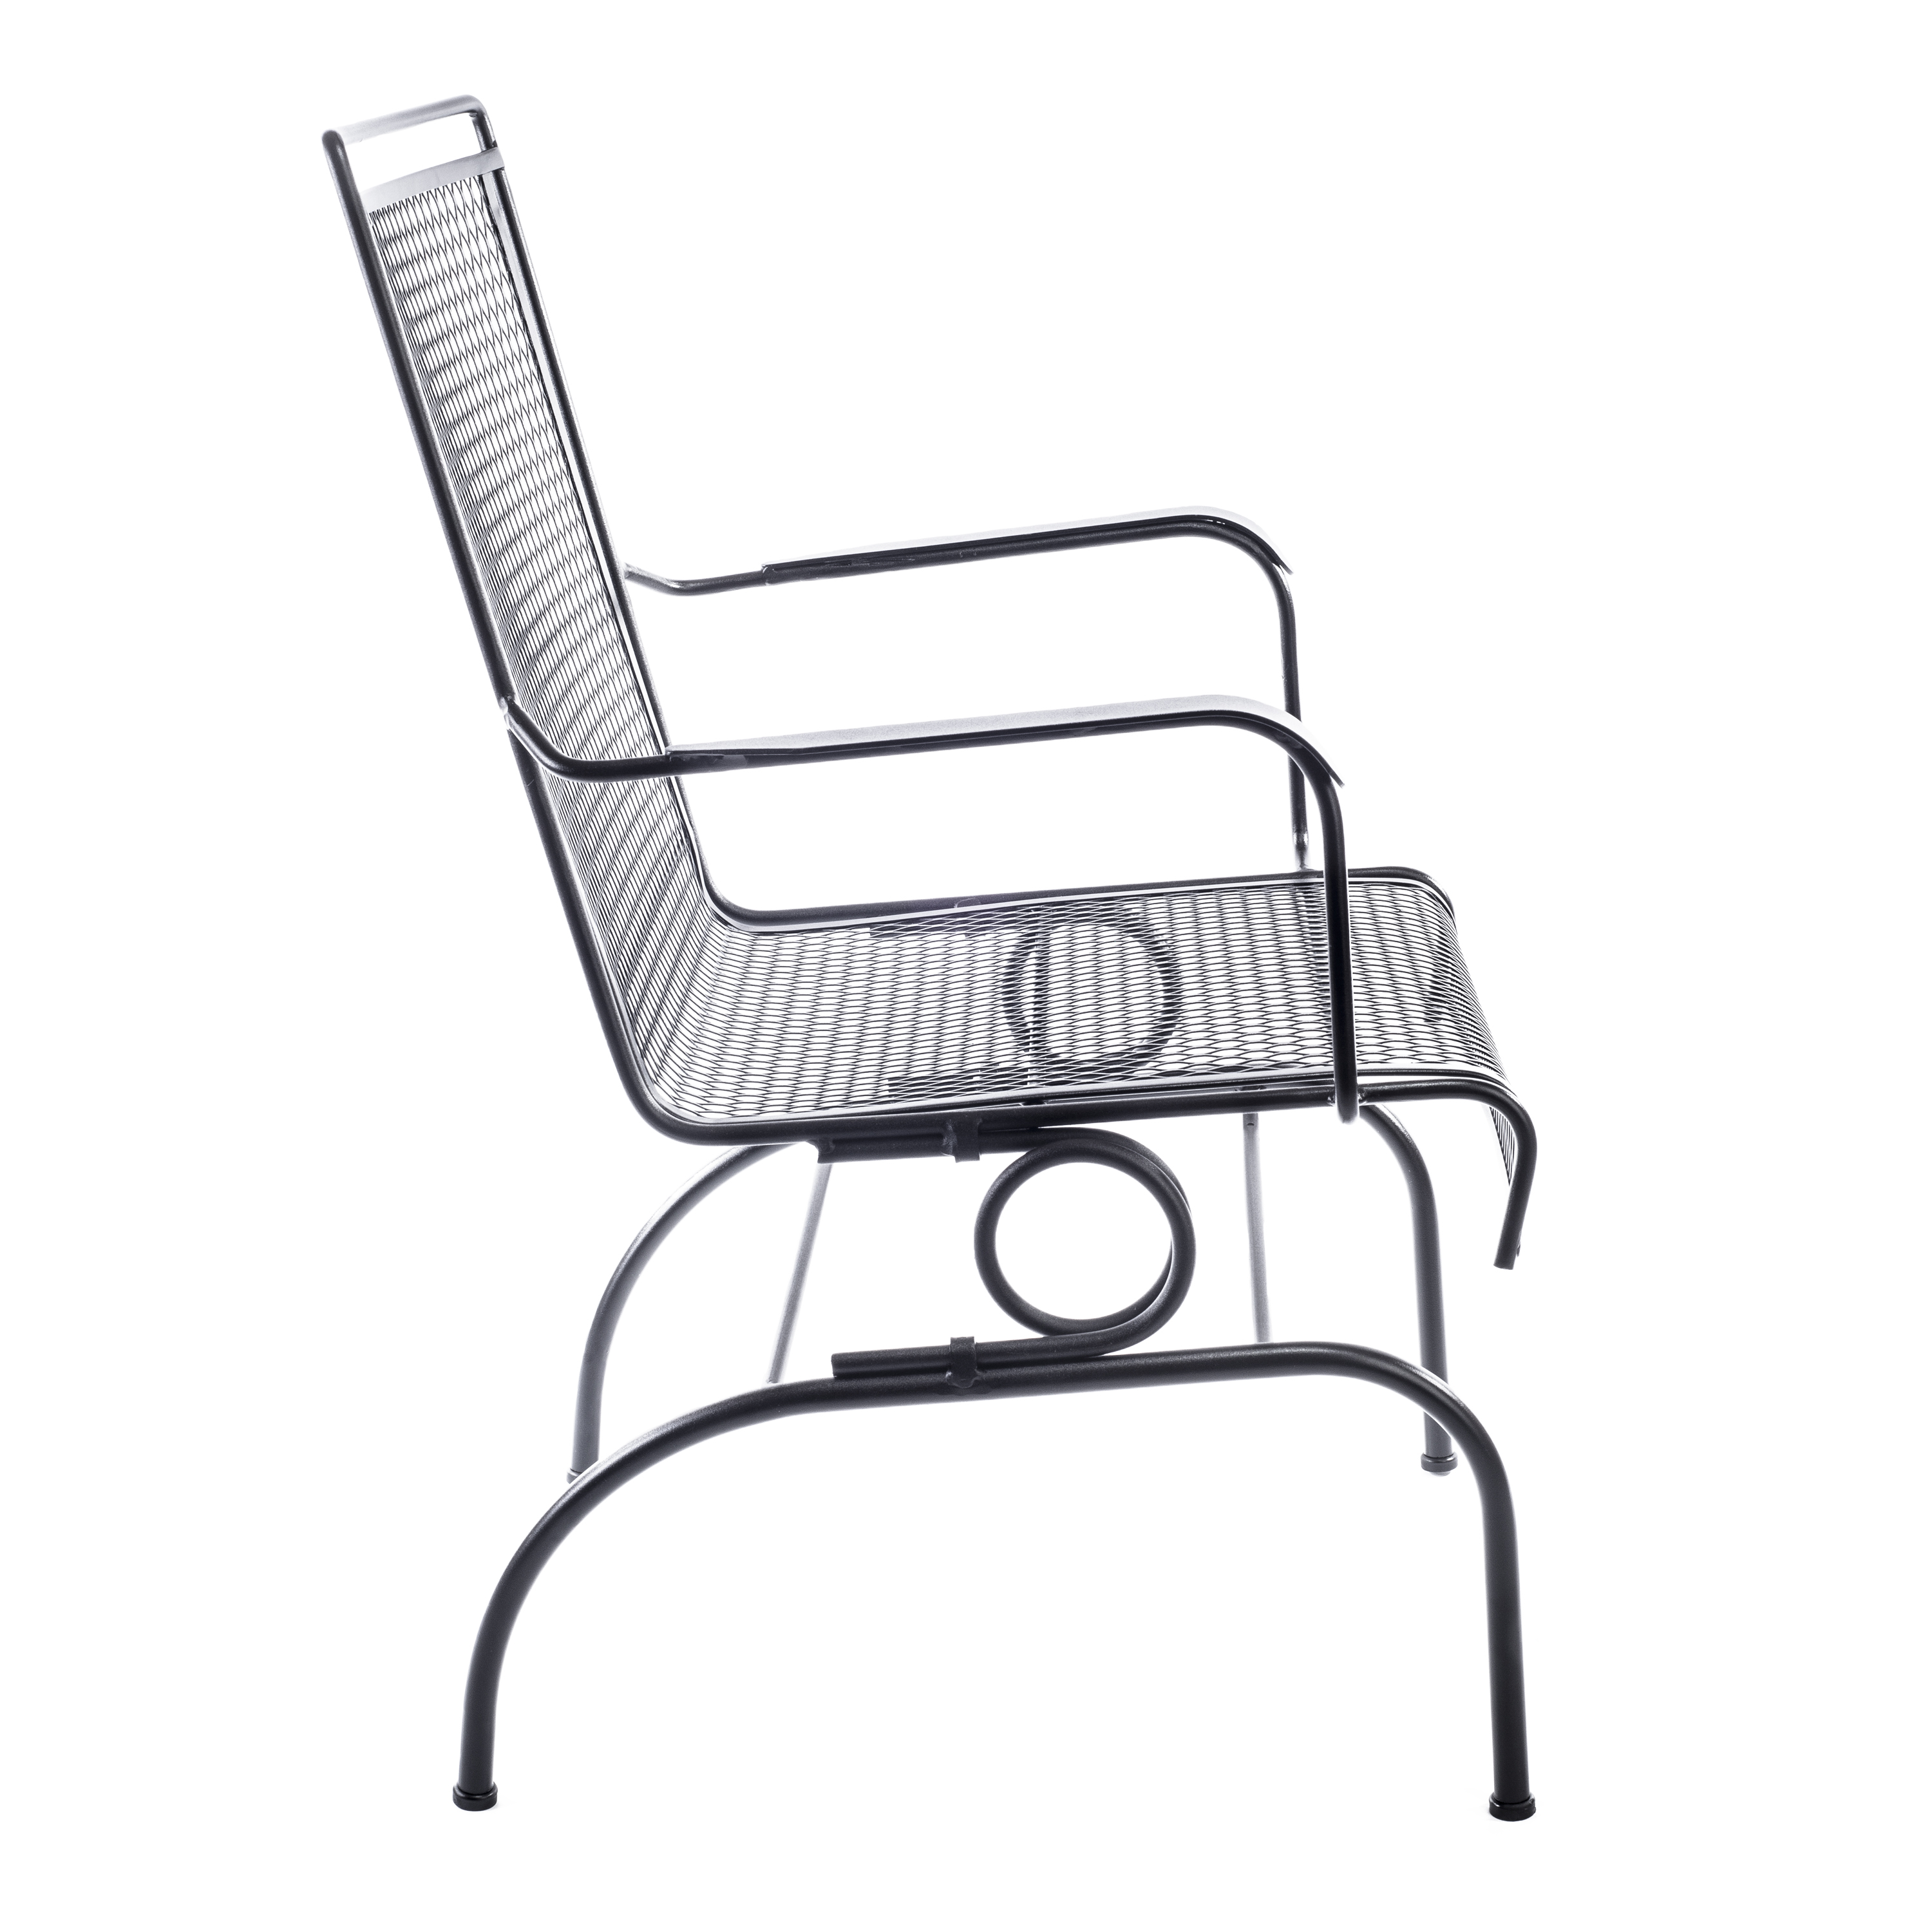 Arlington House Wrought Iron Outdoor Action Dining Chair, Charcoal - image 3 of 5